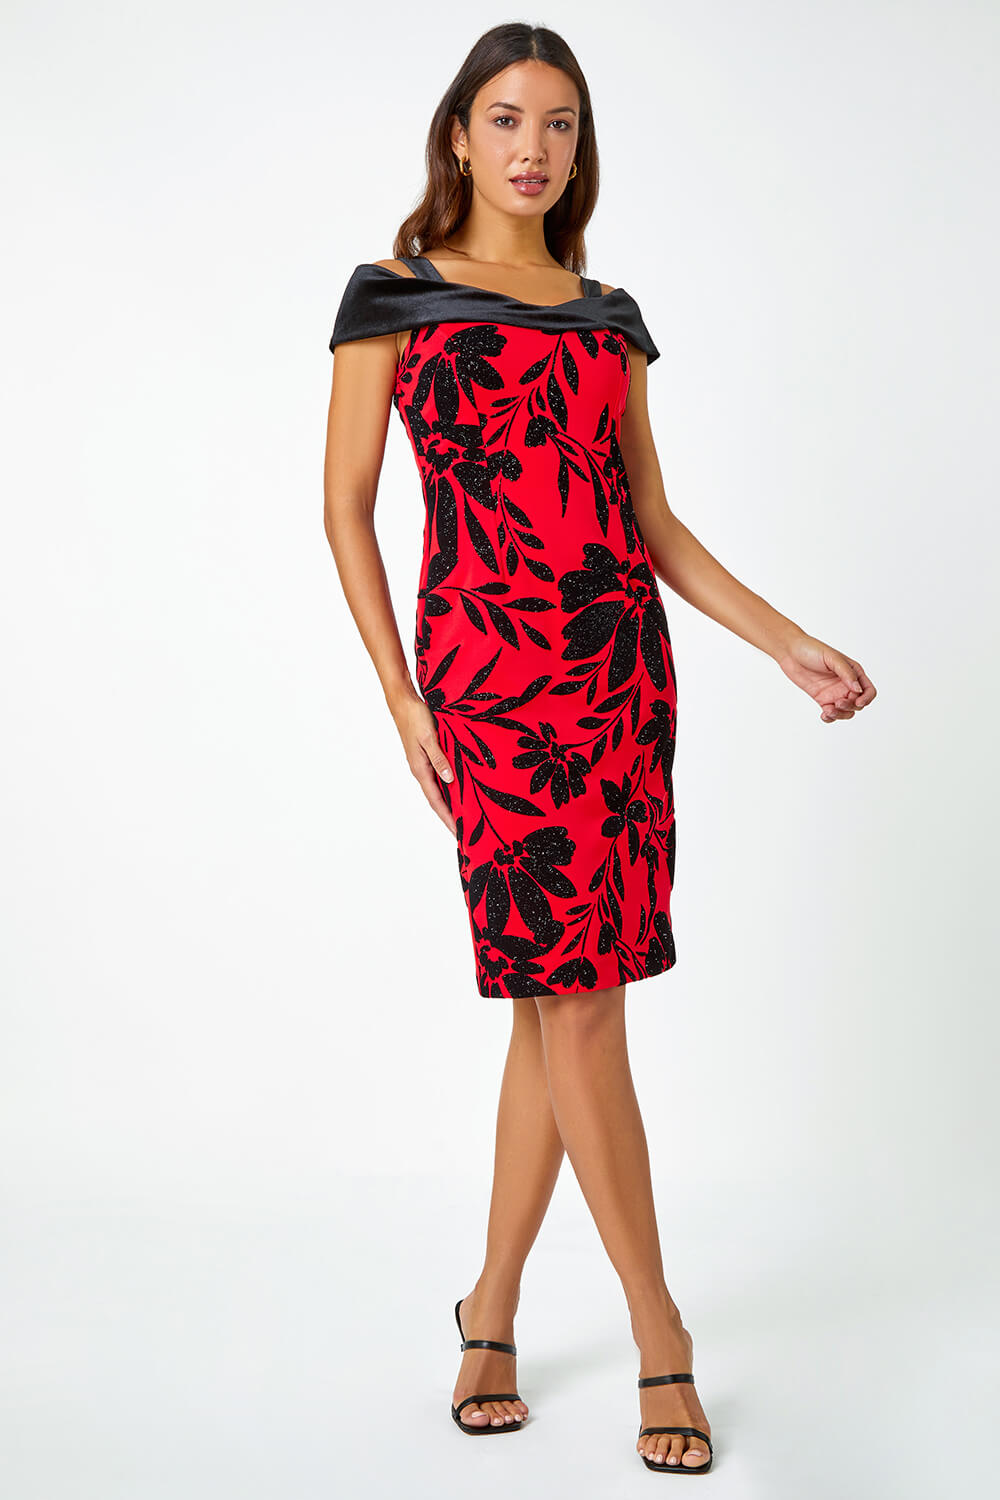 Red Flocked Floral Premium Stretch Dress, Image 2 of 5